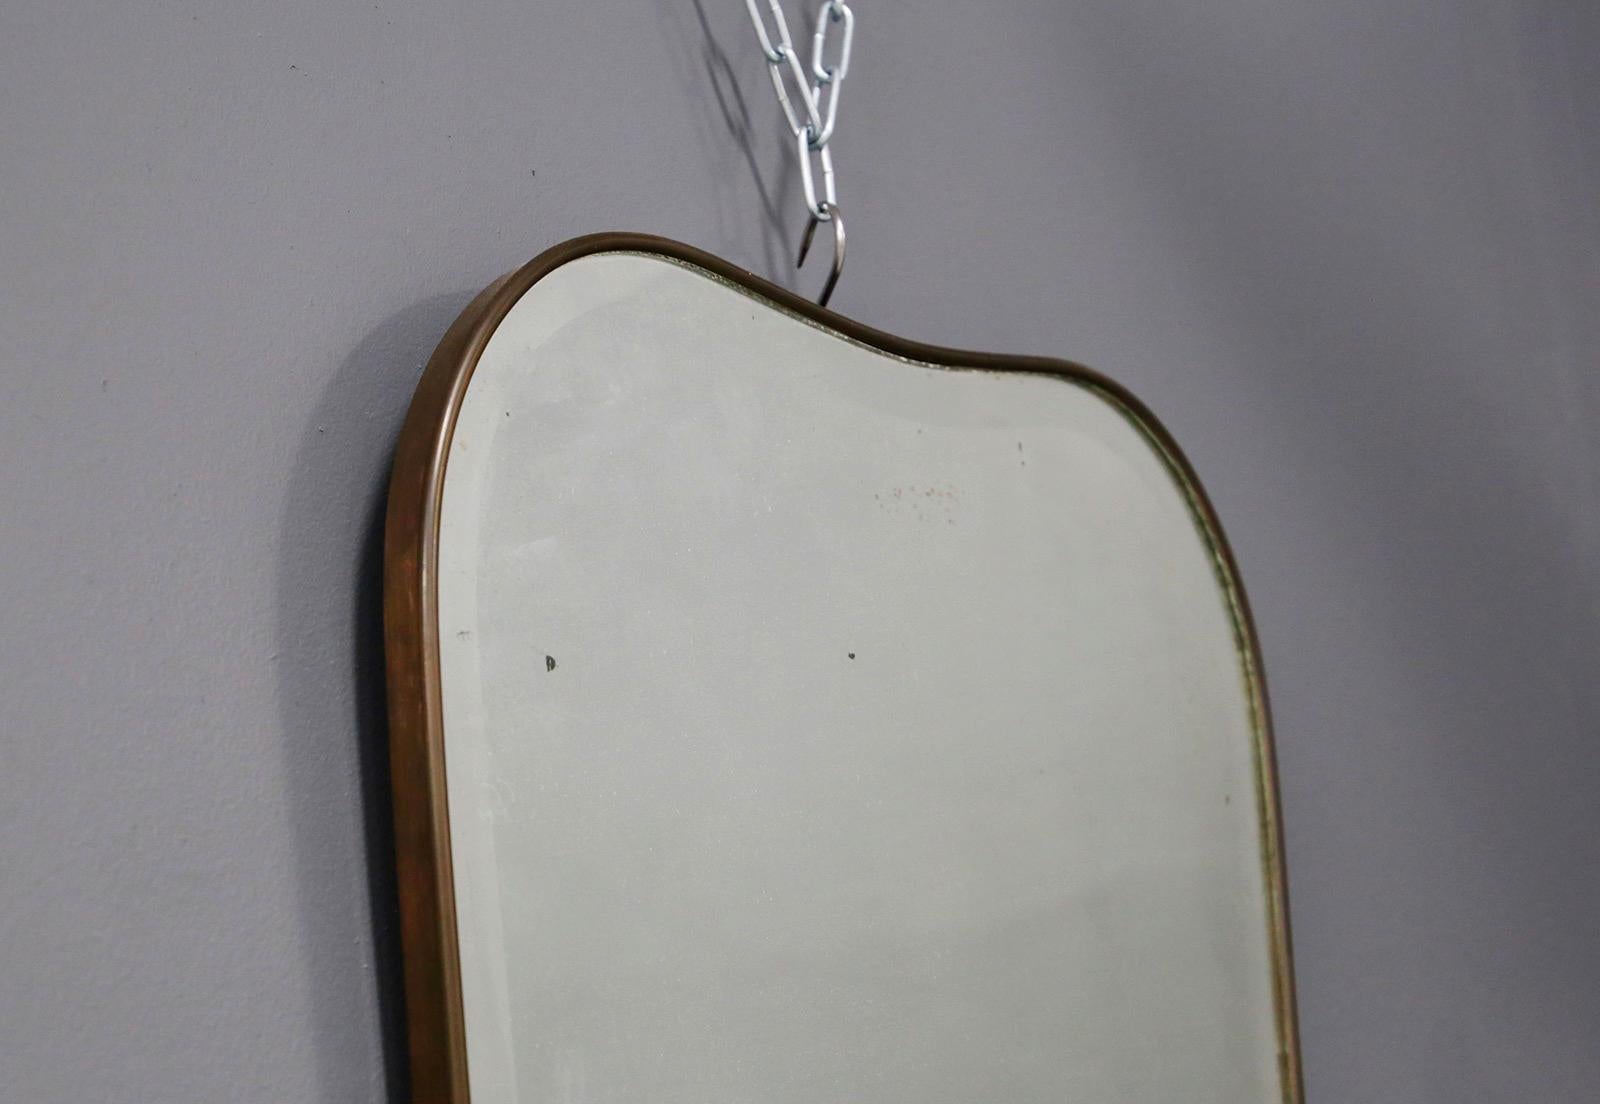 Elegant wall mirror of the 1950s Italian attributed to Gio Ponti for Fontana Arte production.
The mirror is made of curved brass with slight wear due to age and use. The peculiarity of the mirror is its heart-shaped shape typical of the Pontian